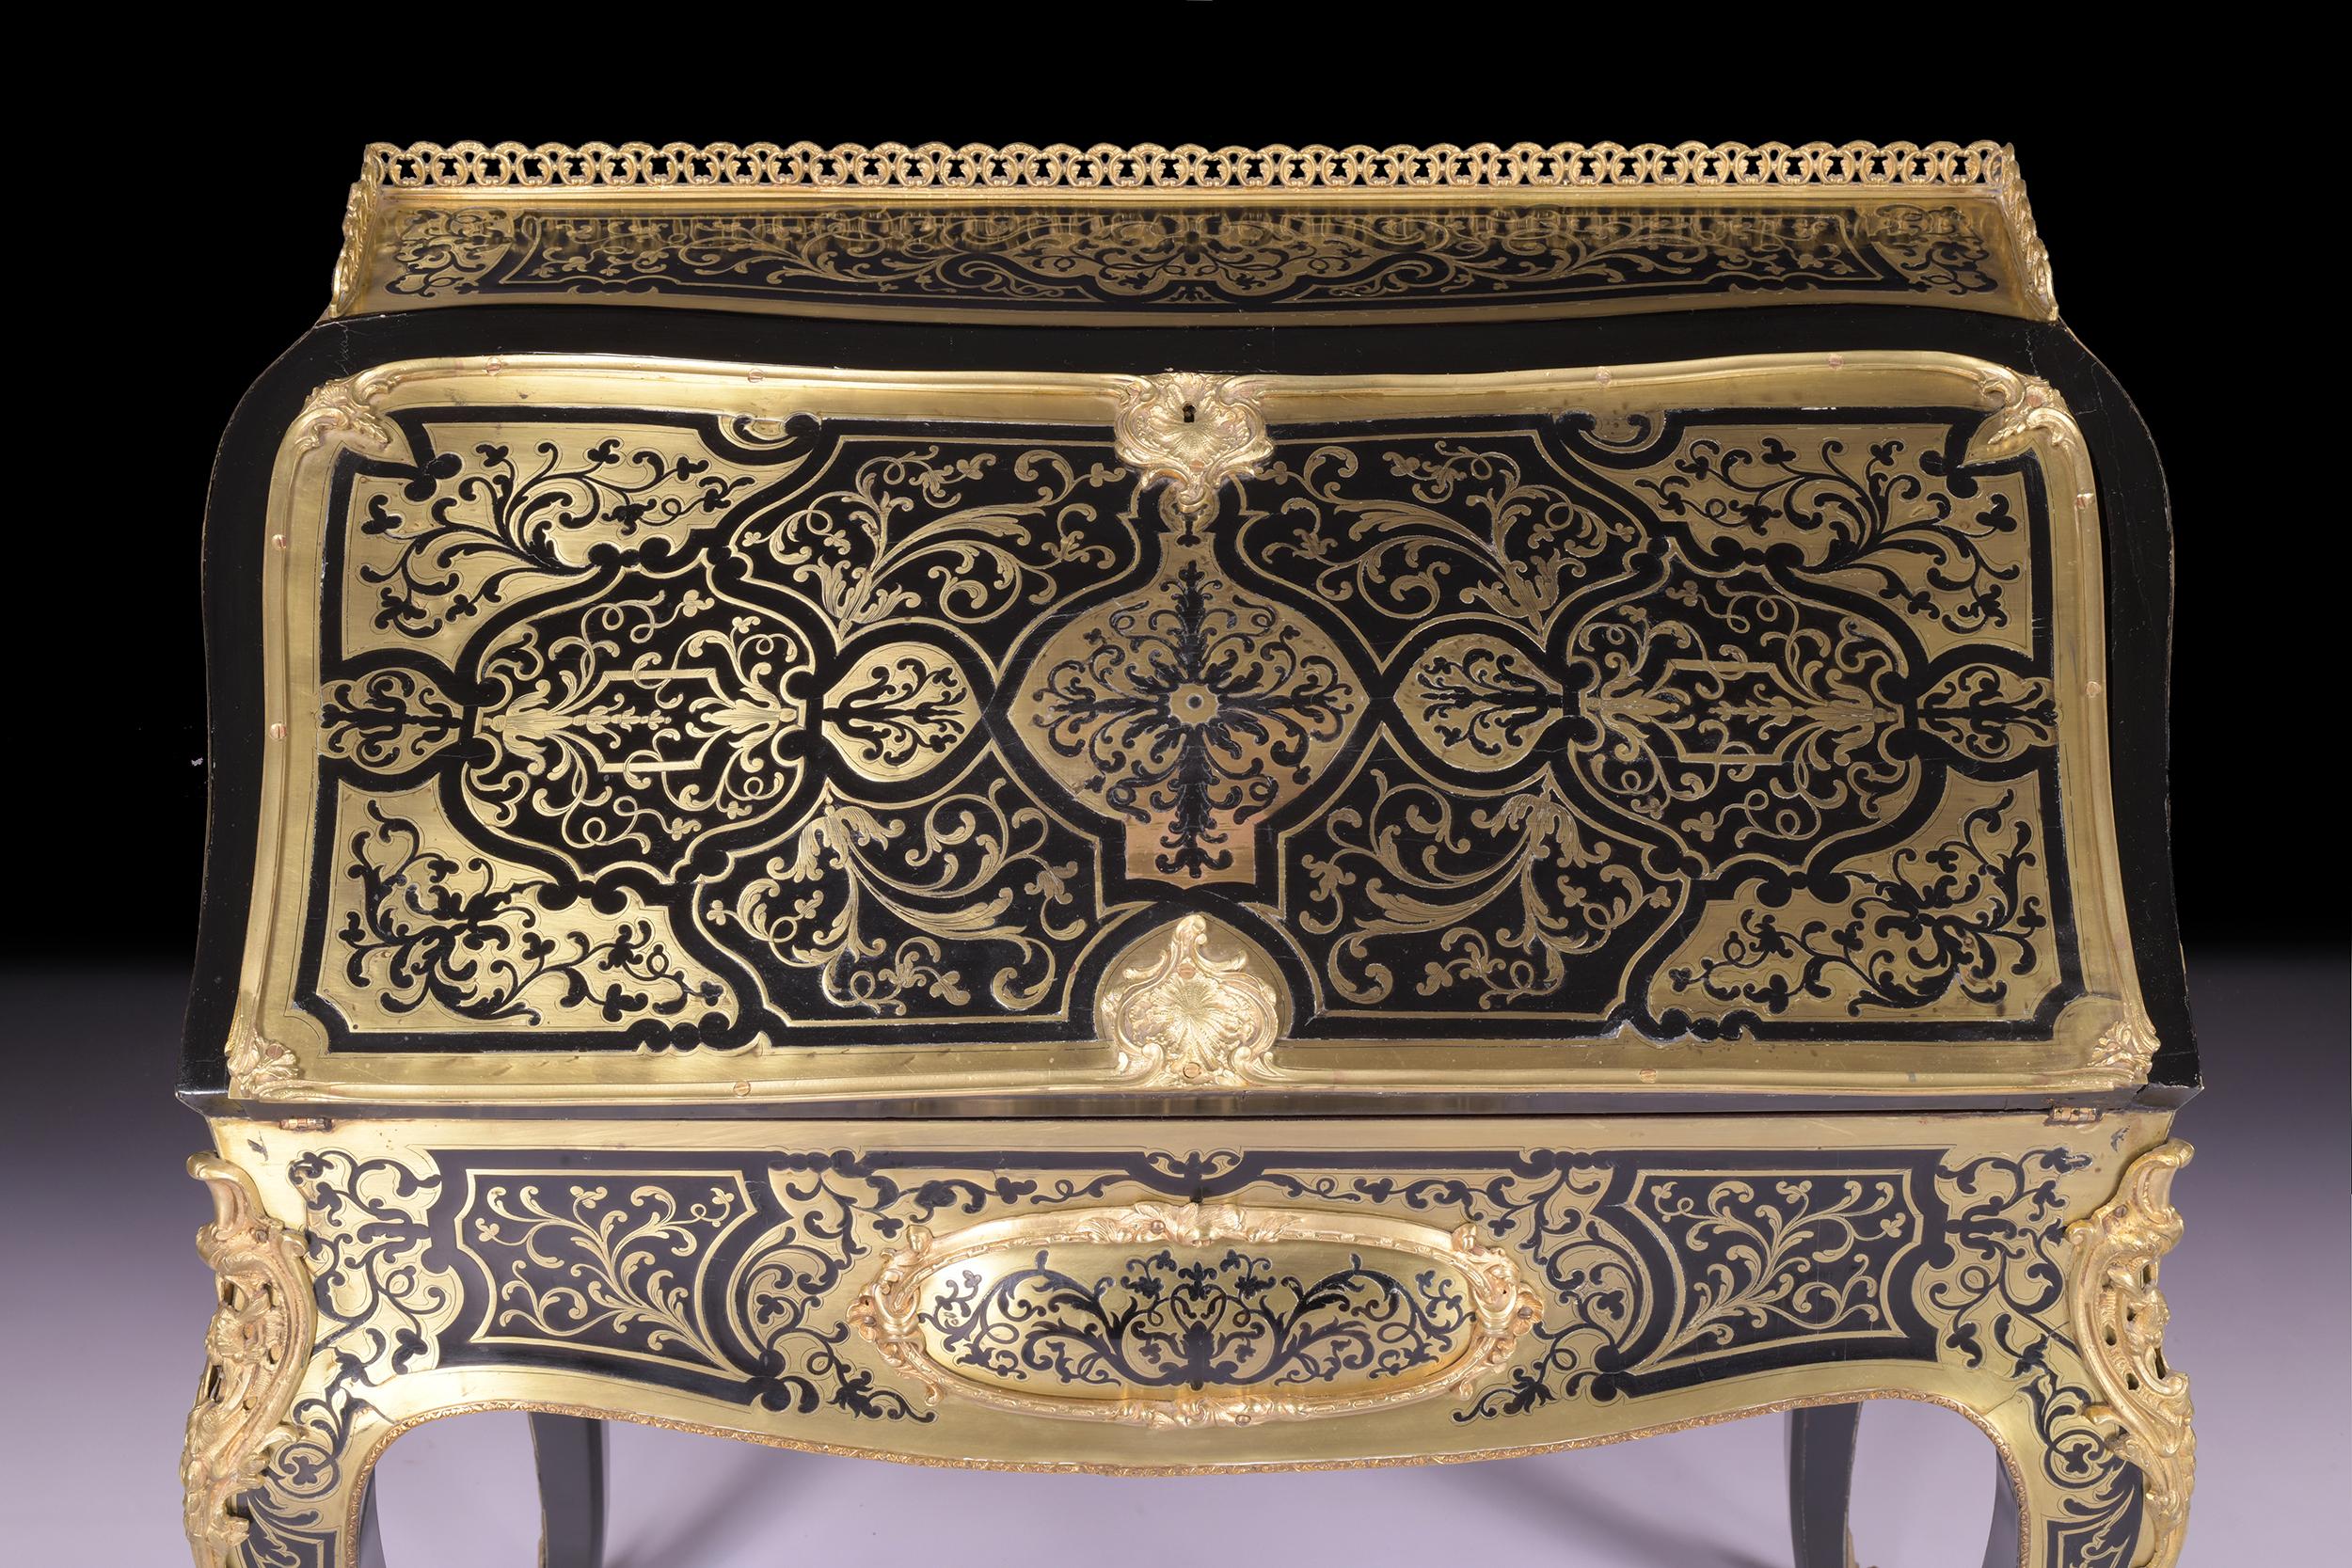 19th Century French Louis XV Style Boulle Ladies Bombe Bureau For Sale 2